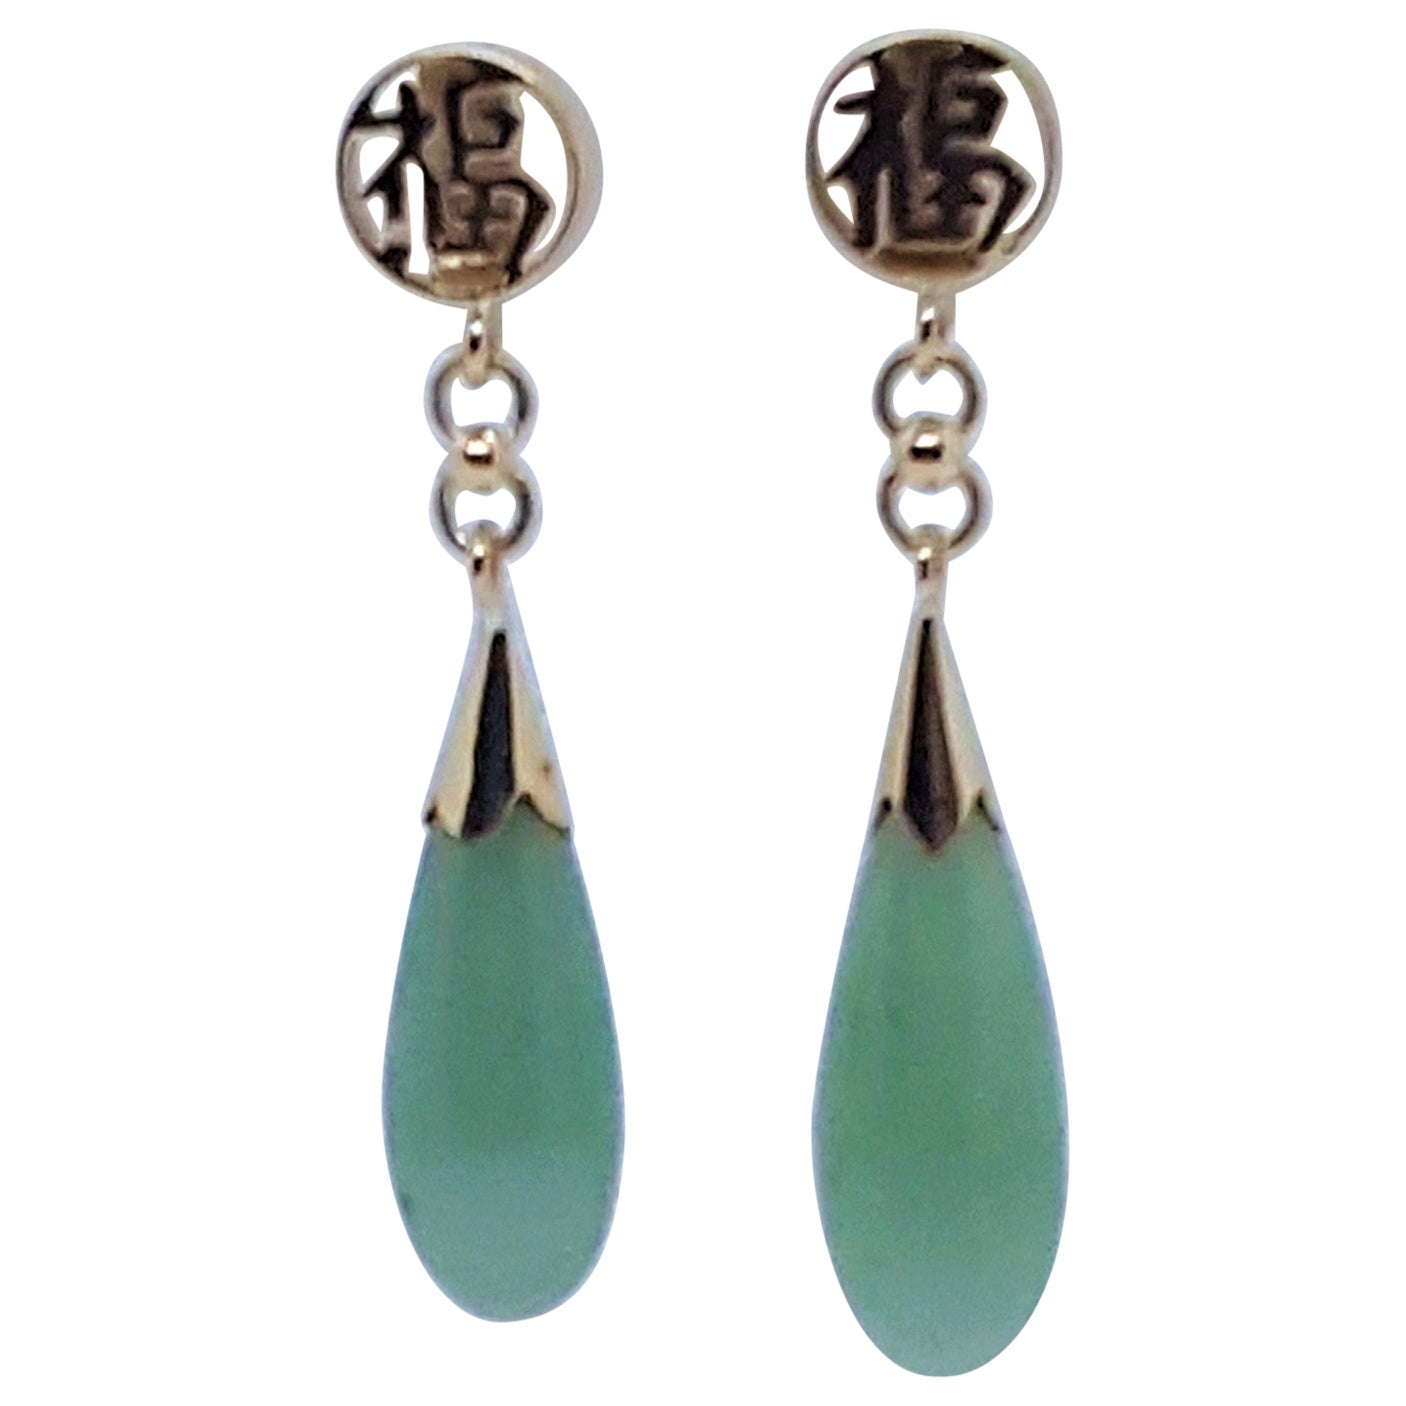 Details about   VINTAGE 14K GOLD FILLED 35 MM JADEITE  GREEN OVAL DROP LEVER BACK EARRINGS  AA 